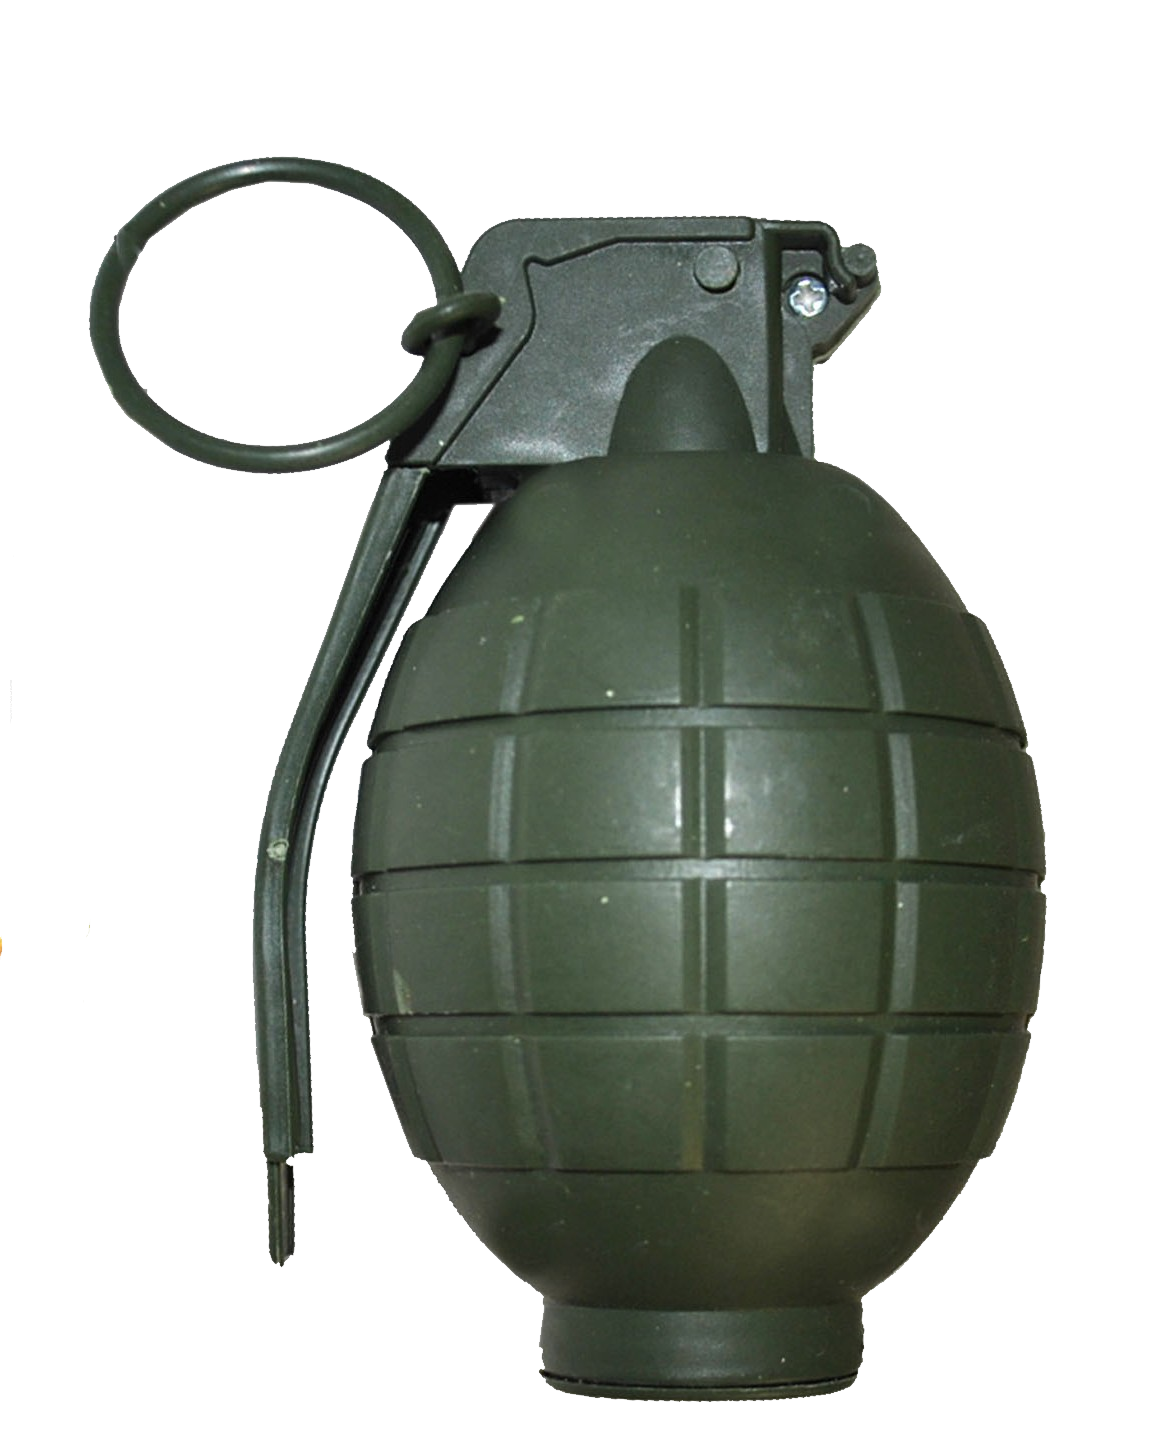 Grenade Image PNG Image High Quality PNG Image